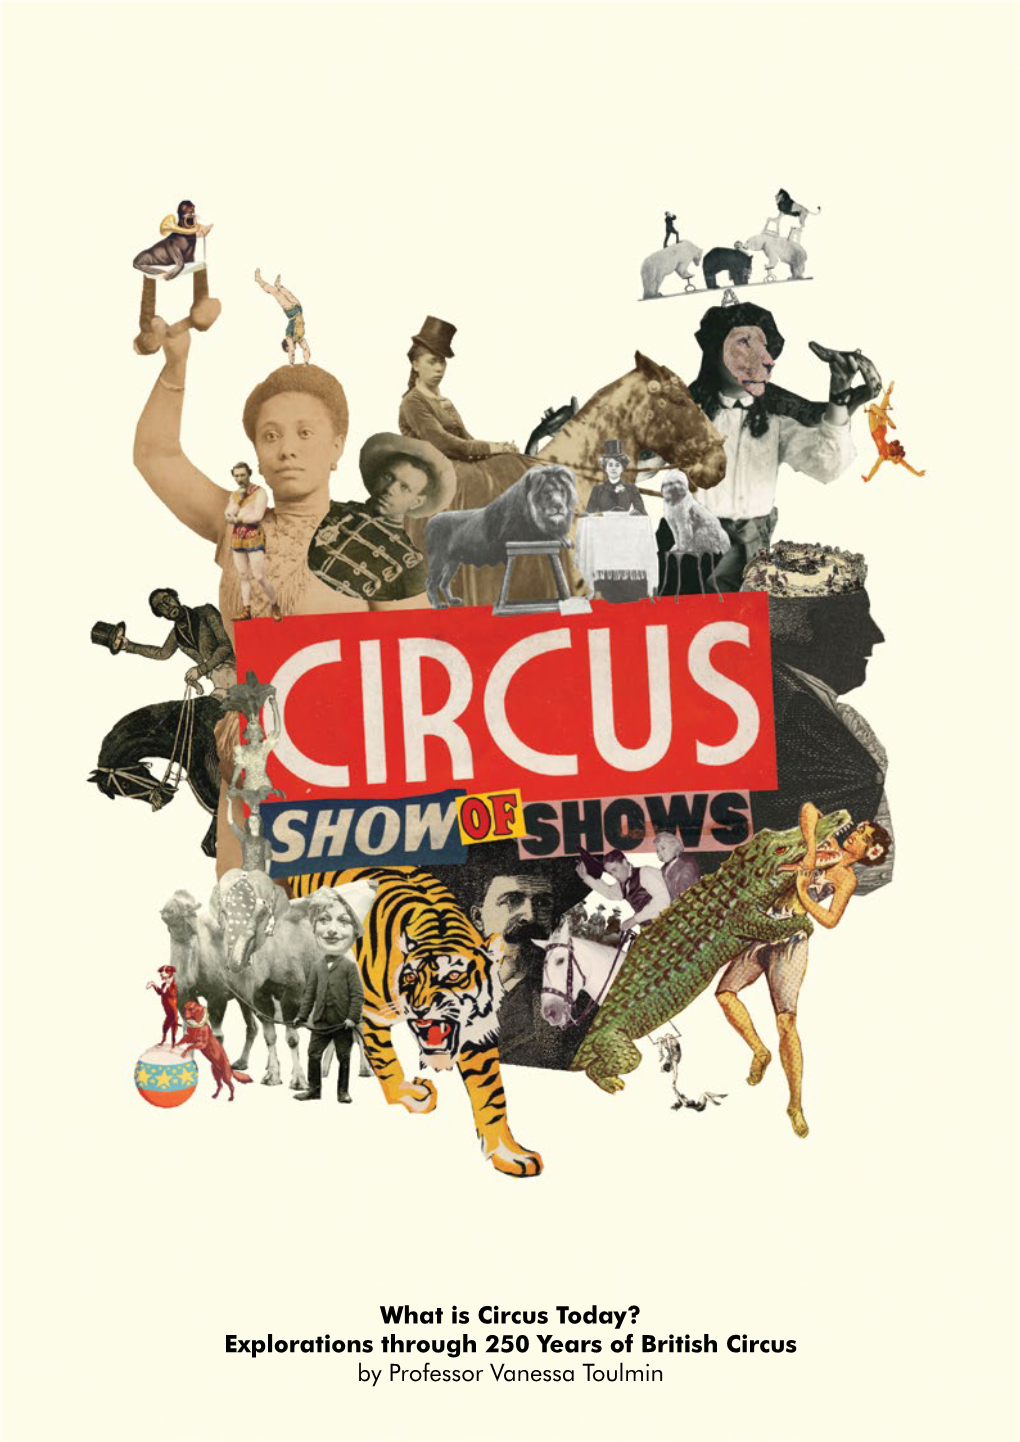 What Is Circus Today? Explorations Through 250 Years of British Circus by Professor Vanessa Toulmin in the Beginning